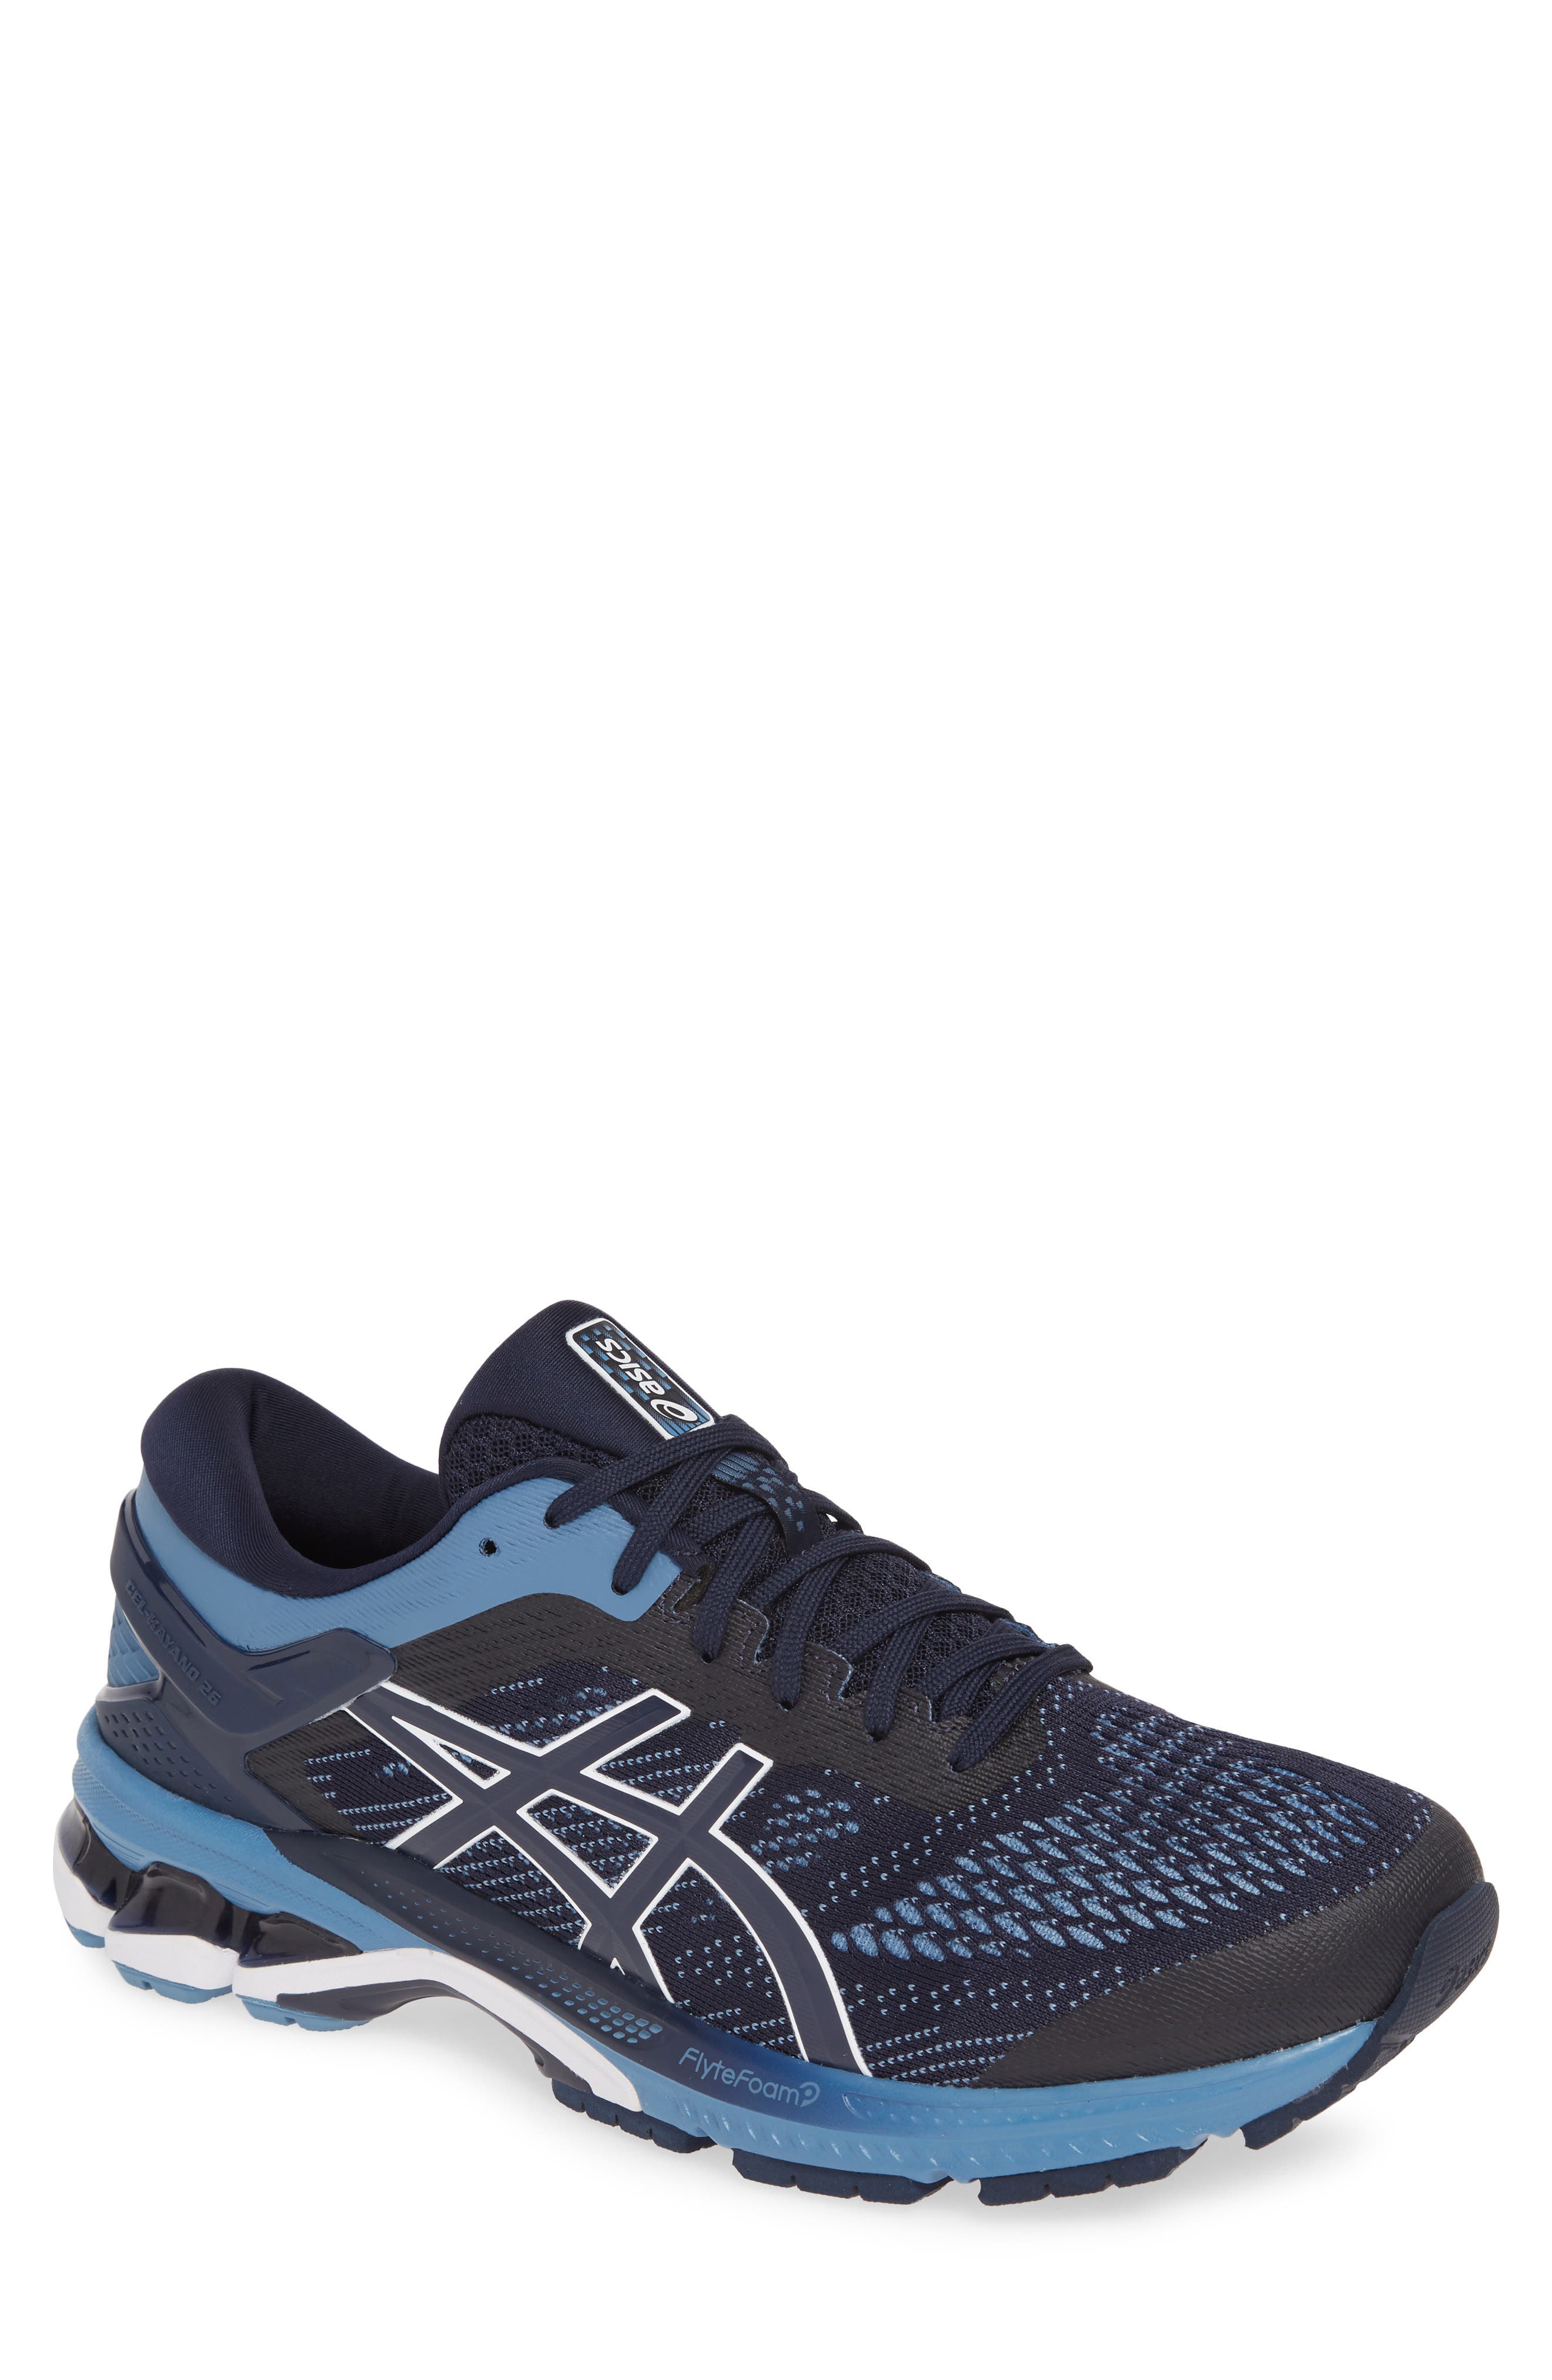 asics shoes mens for sale